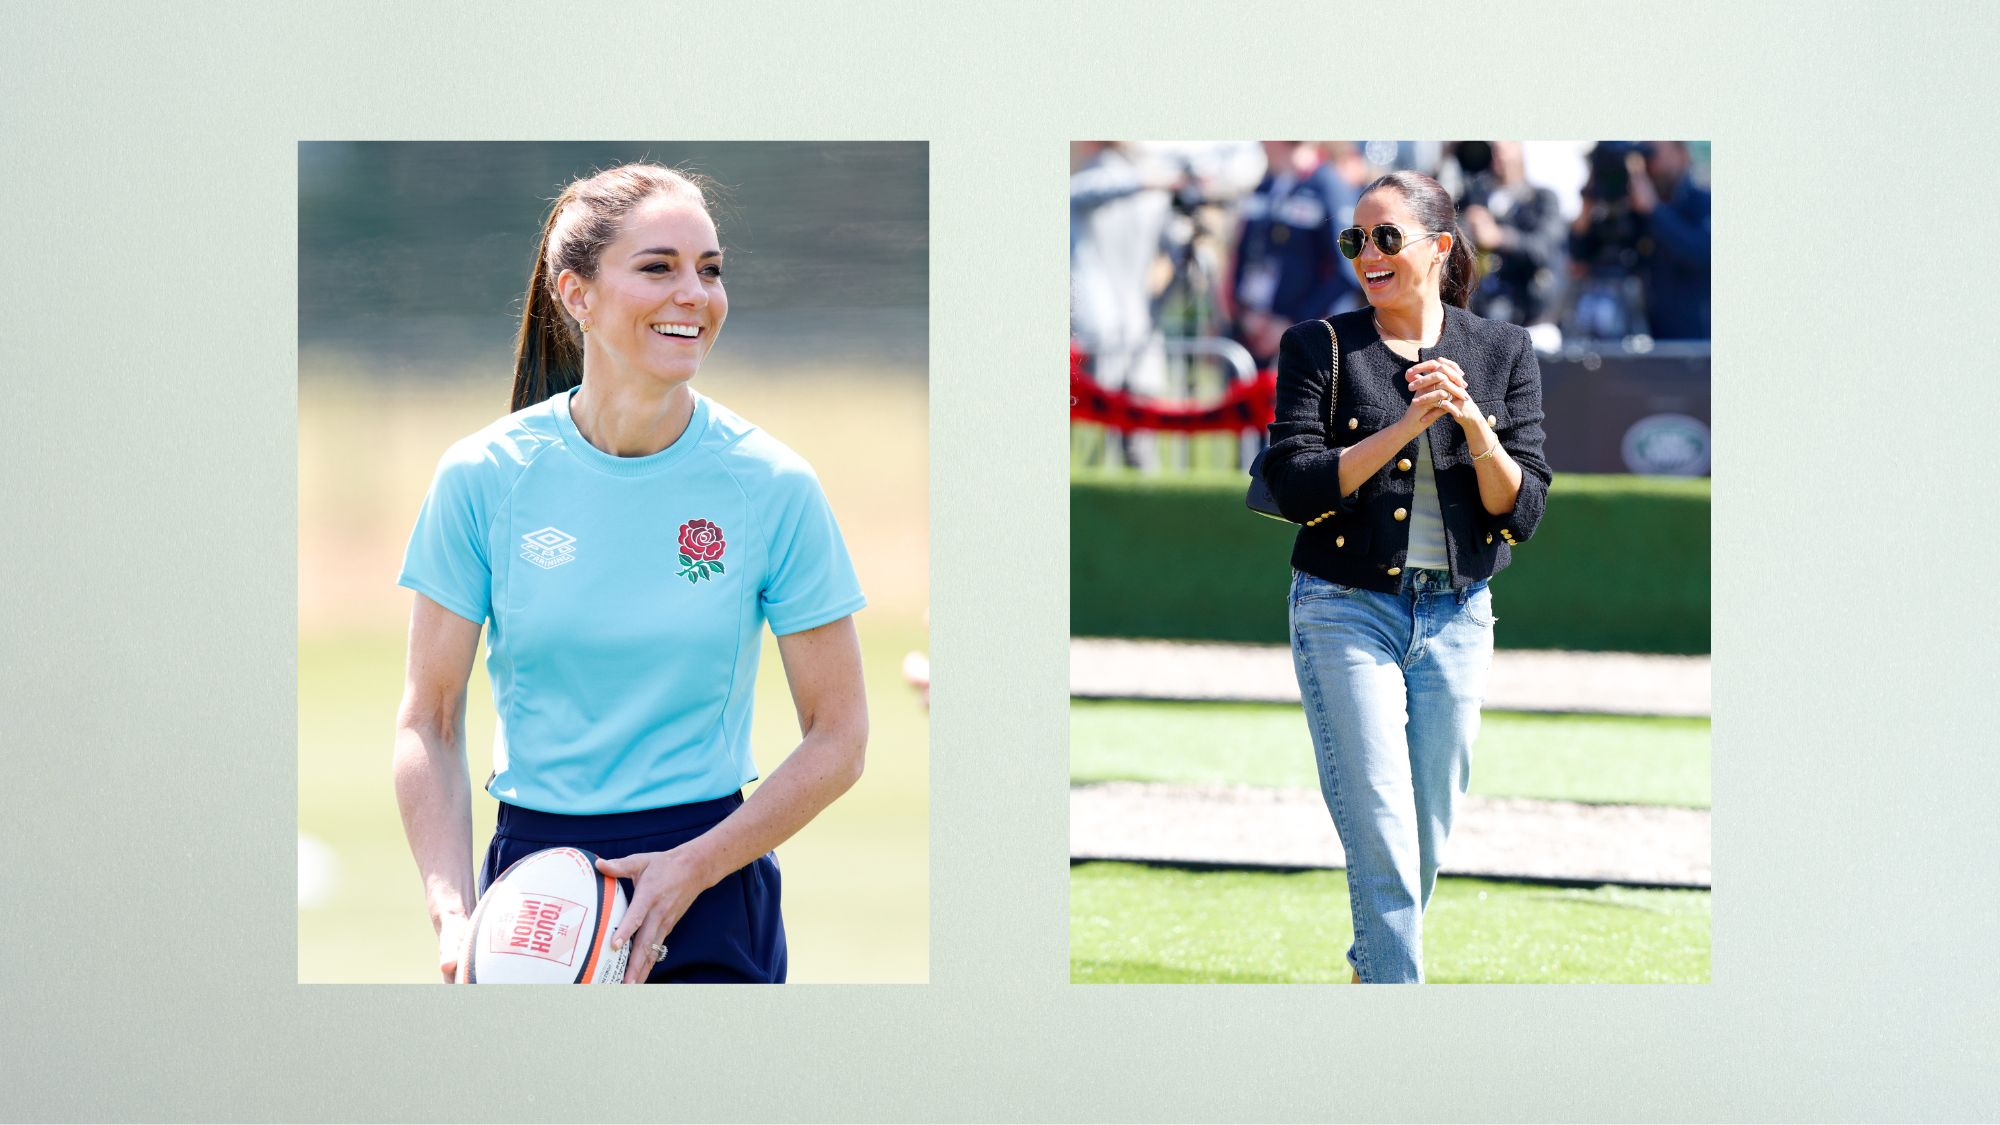 FYI, the Royals wear these 5 workout brands on rotation